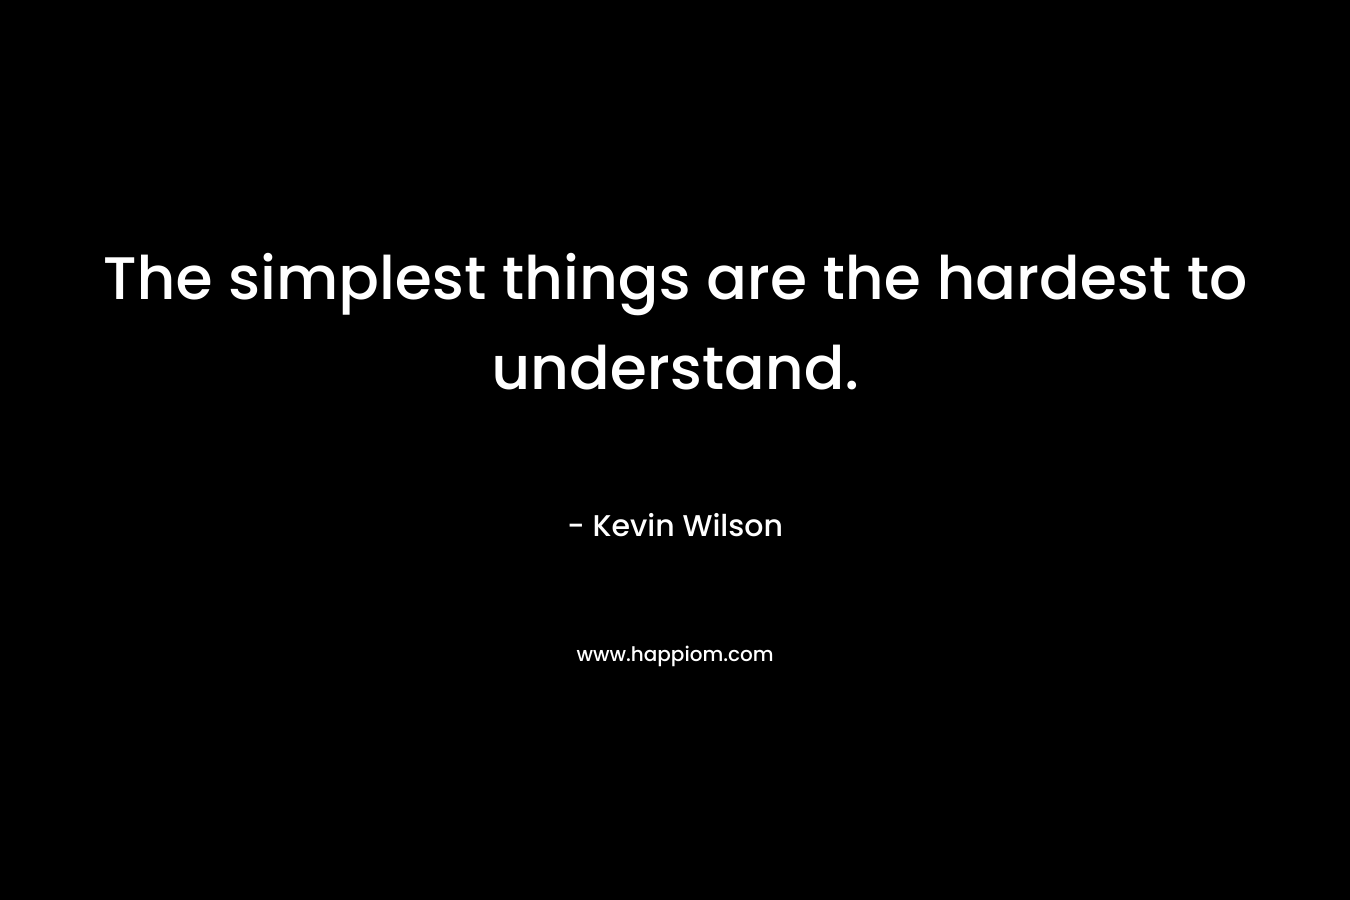 The simplest things are the hardest to understand.